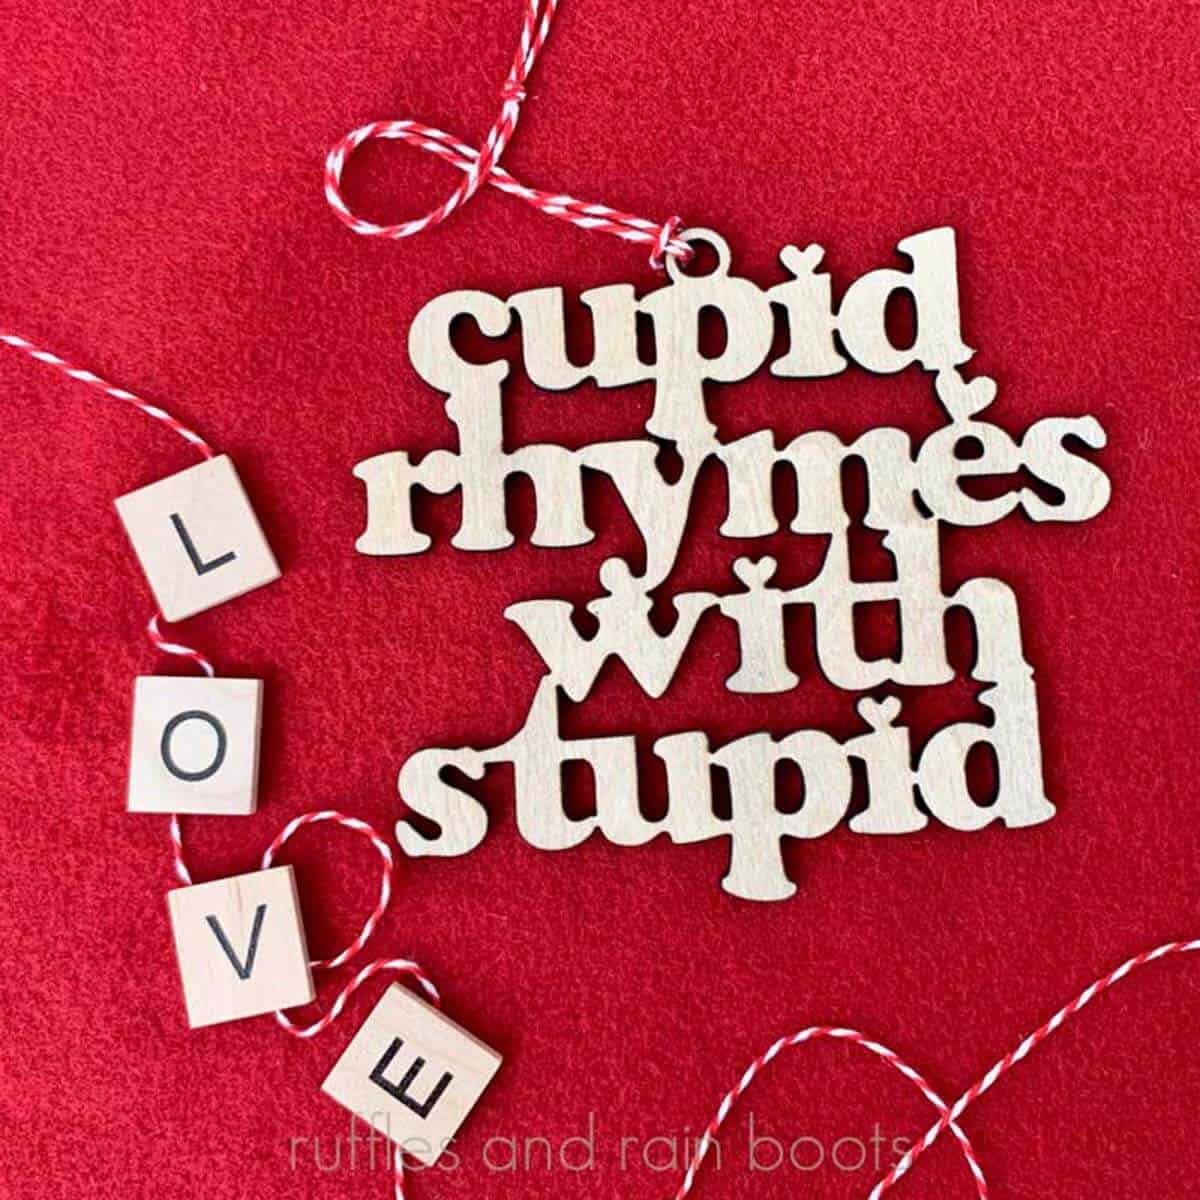 Square close up image of a wood ornament which reads Cupid rhymes with stupid on a red background with twine and Scrabble letters.